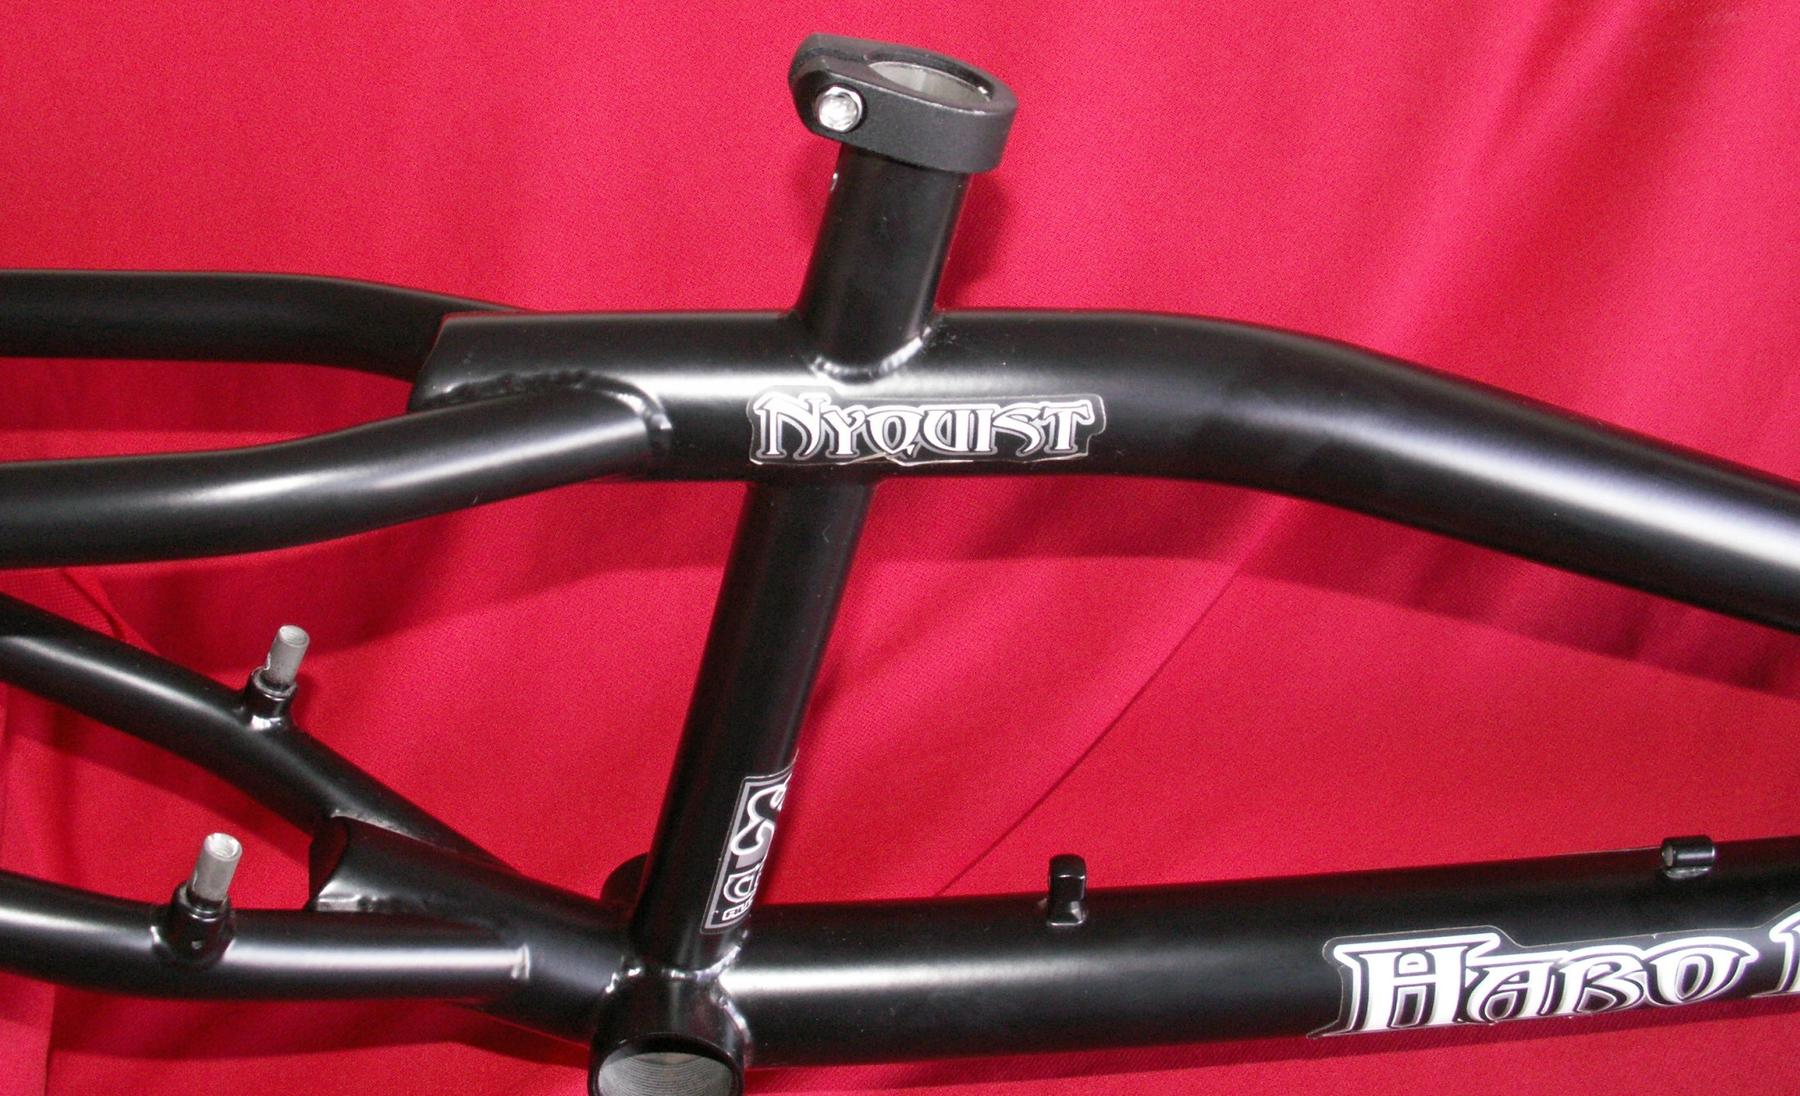 2003 Nyquist Backtrail X, Pro